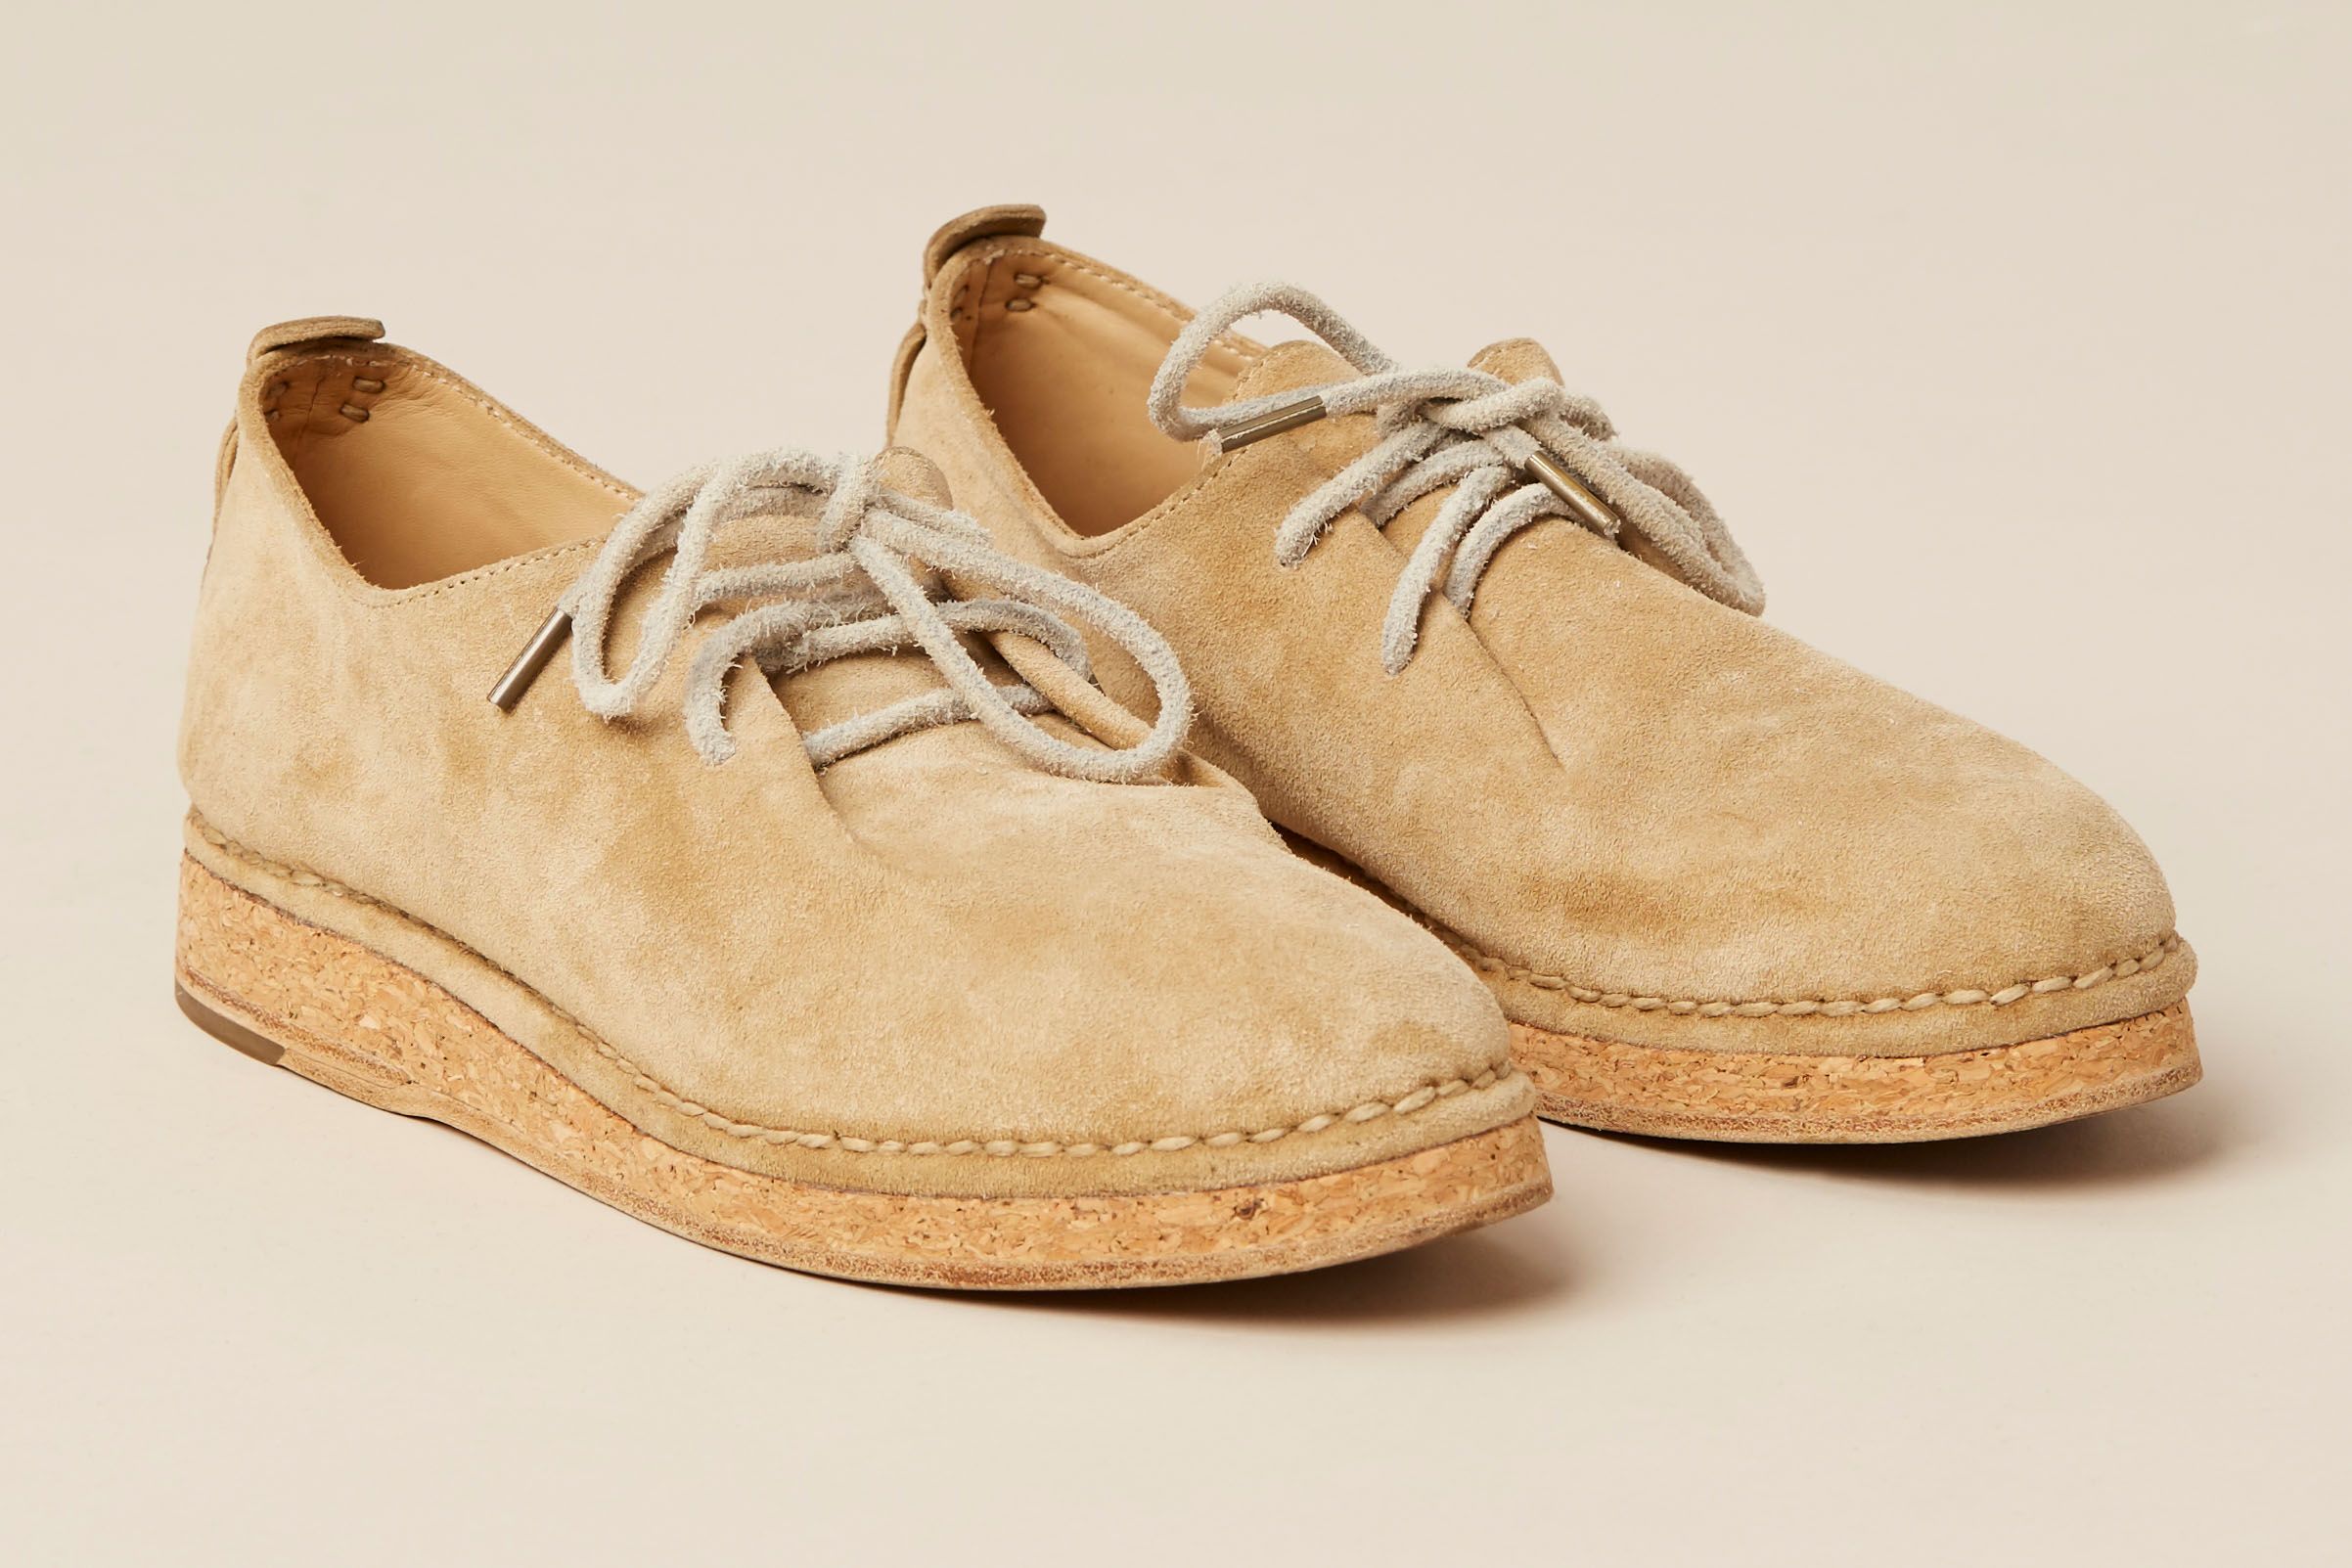 These Handsewn Desert Boots Are Perfect for Spring